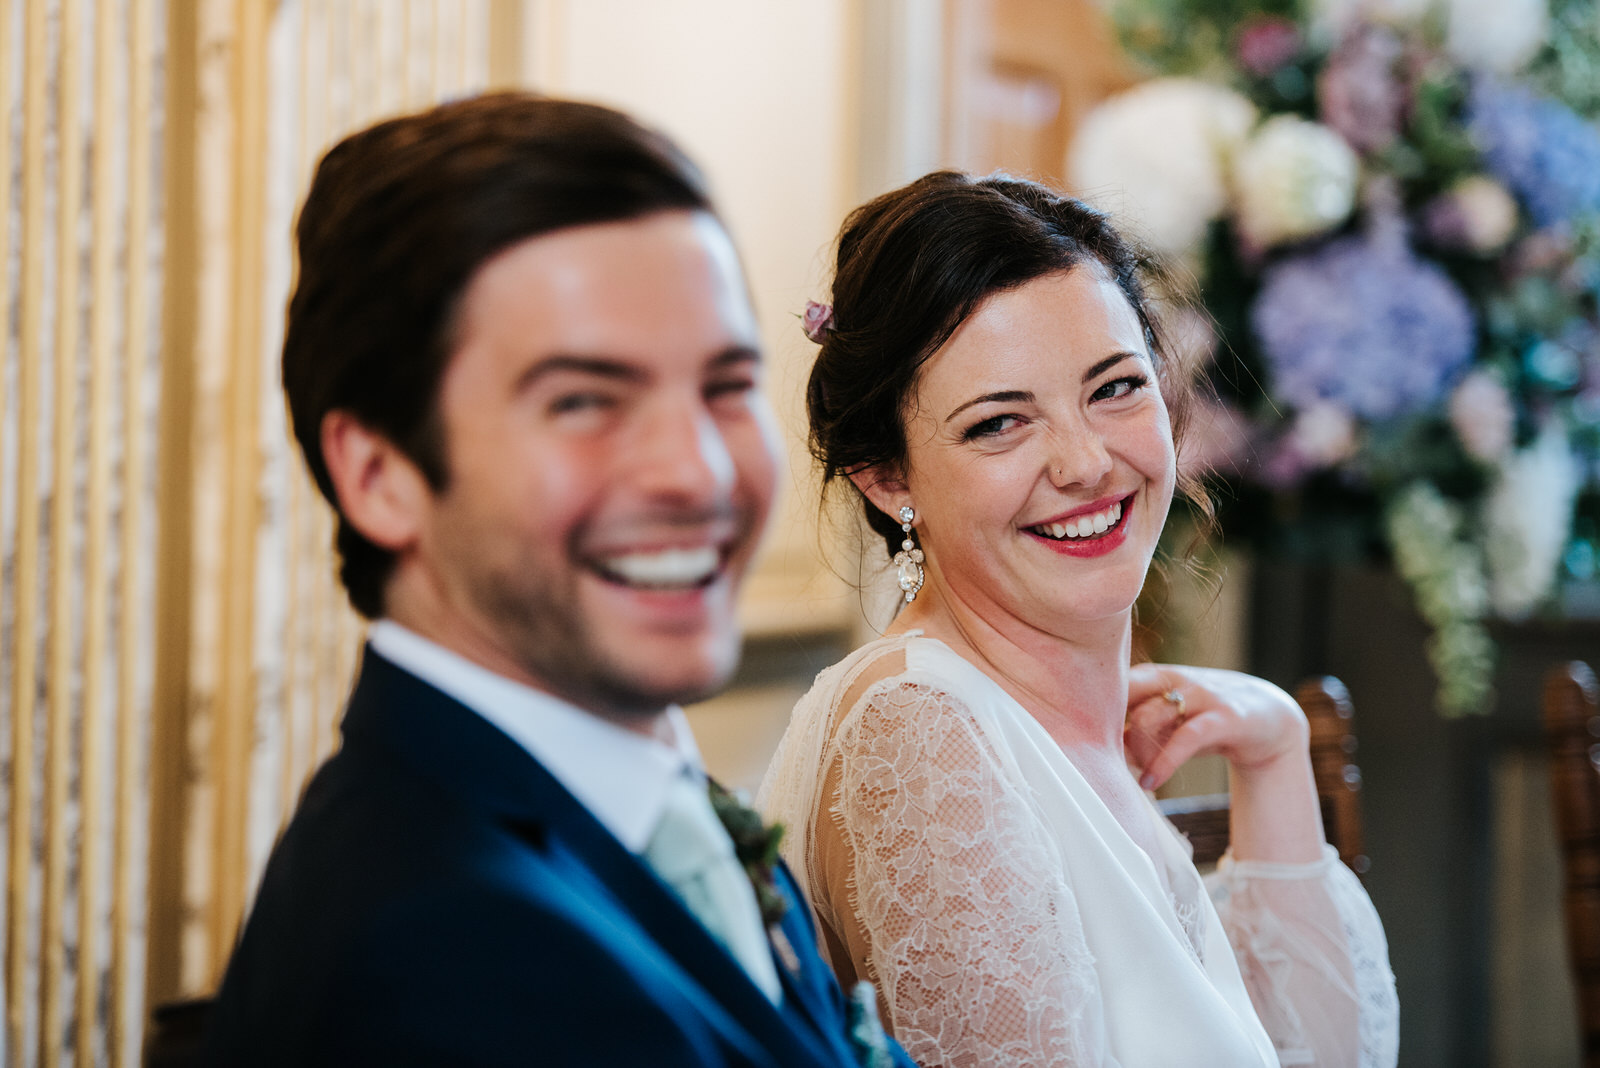 Groom and bride smile with teeth and look into camera